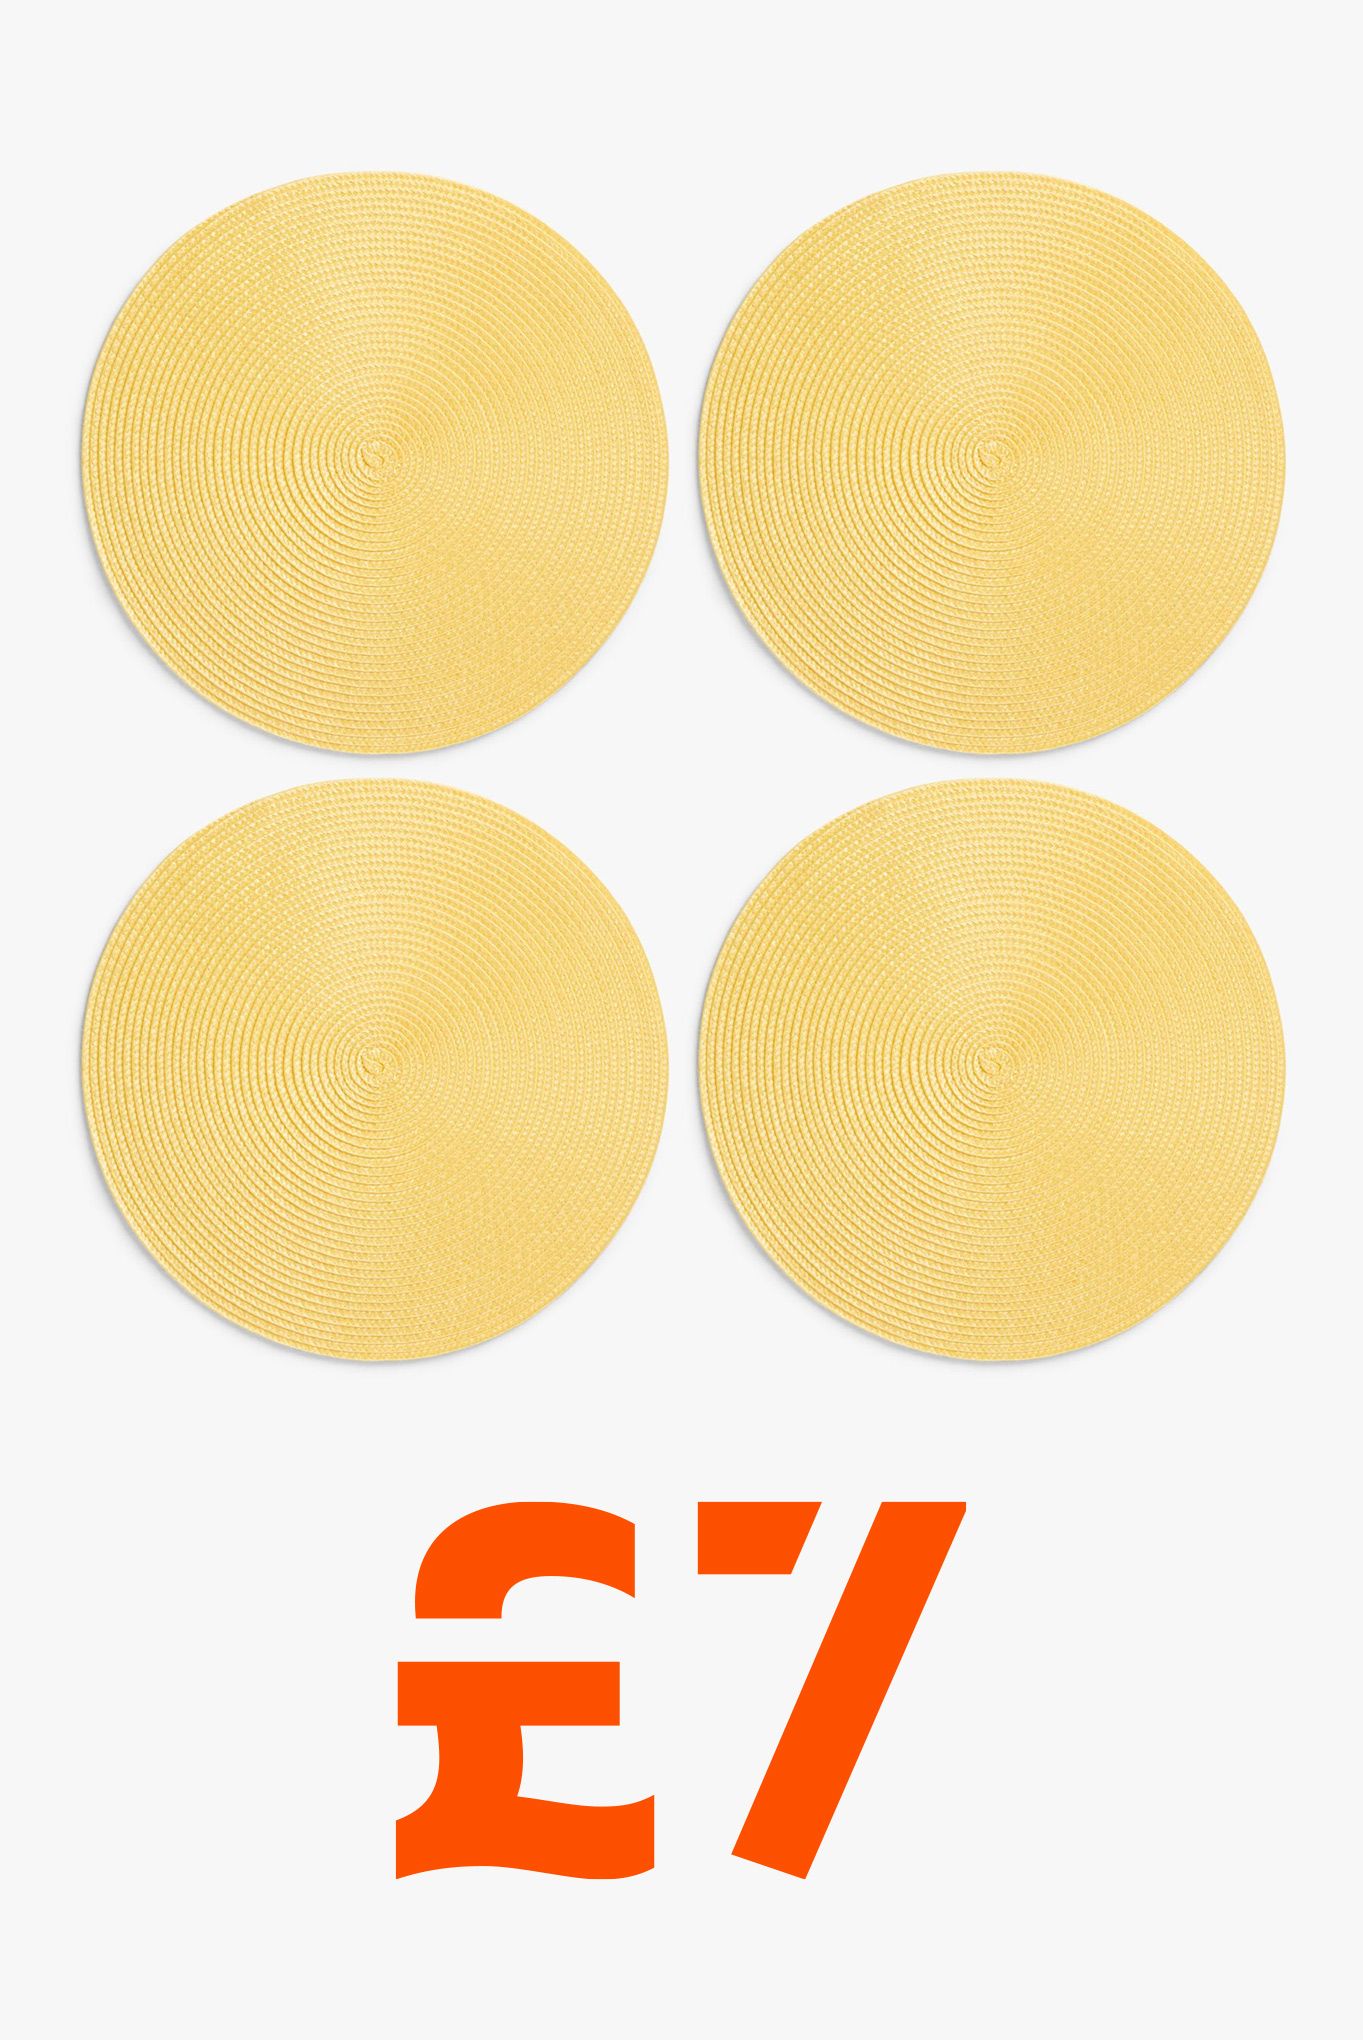 ANYDAY John Lewis & Partners Round Braided Placemats, Set of 4, Yellow £7.00